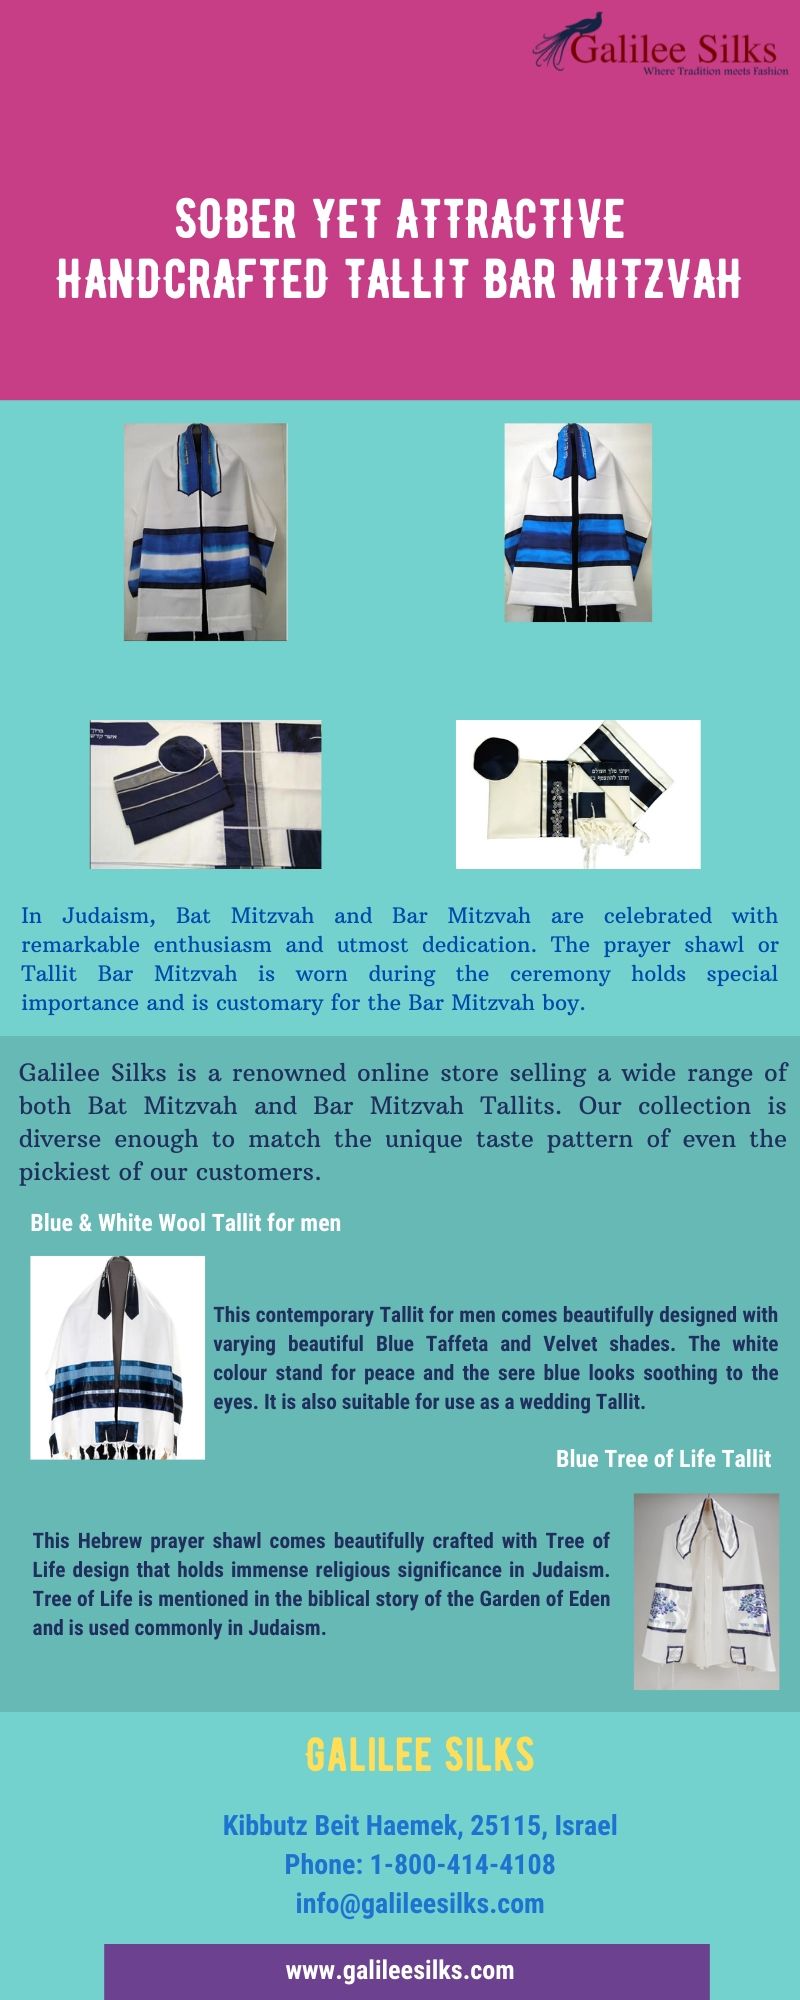 Sober Yet Attractive Handcrafted Tallit Bar Mitzvah Sharpen your knowledge about Bar Mitzvah here. The fine examples of Tallit Bar Mitzvah from Galilee Silks given are worth rolling your eyes on. For more details, visit this link: https://www.galileesilks.com/collections/bar-mitzvah-tallit
 by amramrafi